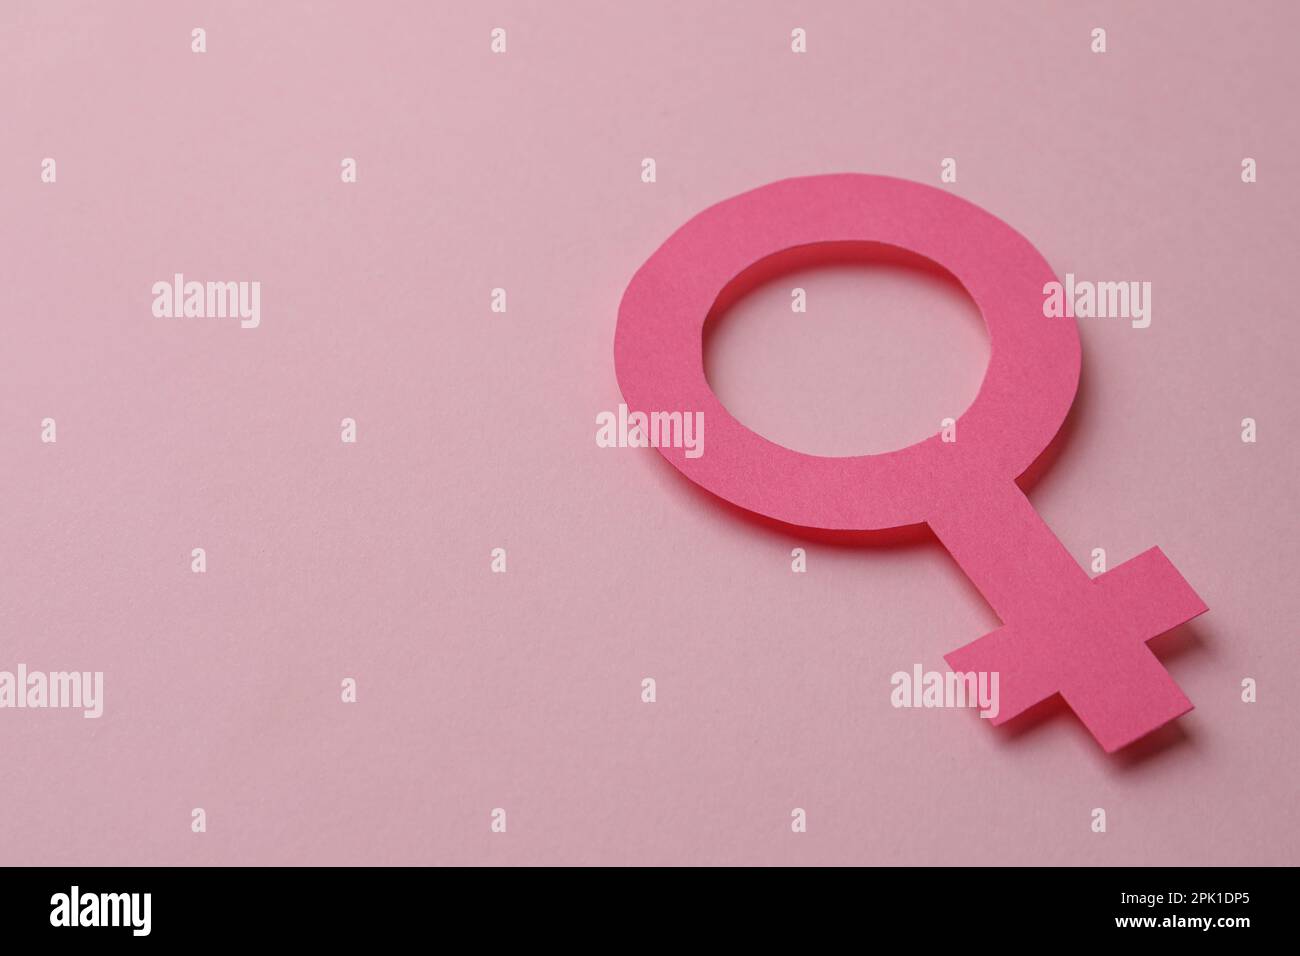 Female gender sign and space for text on pink background Stock Photo